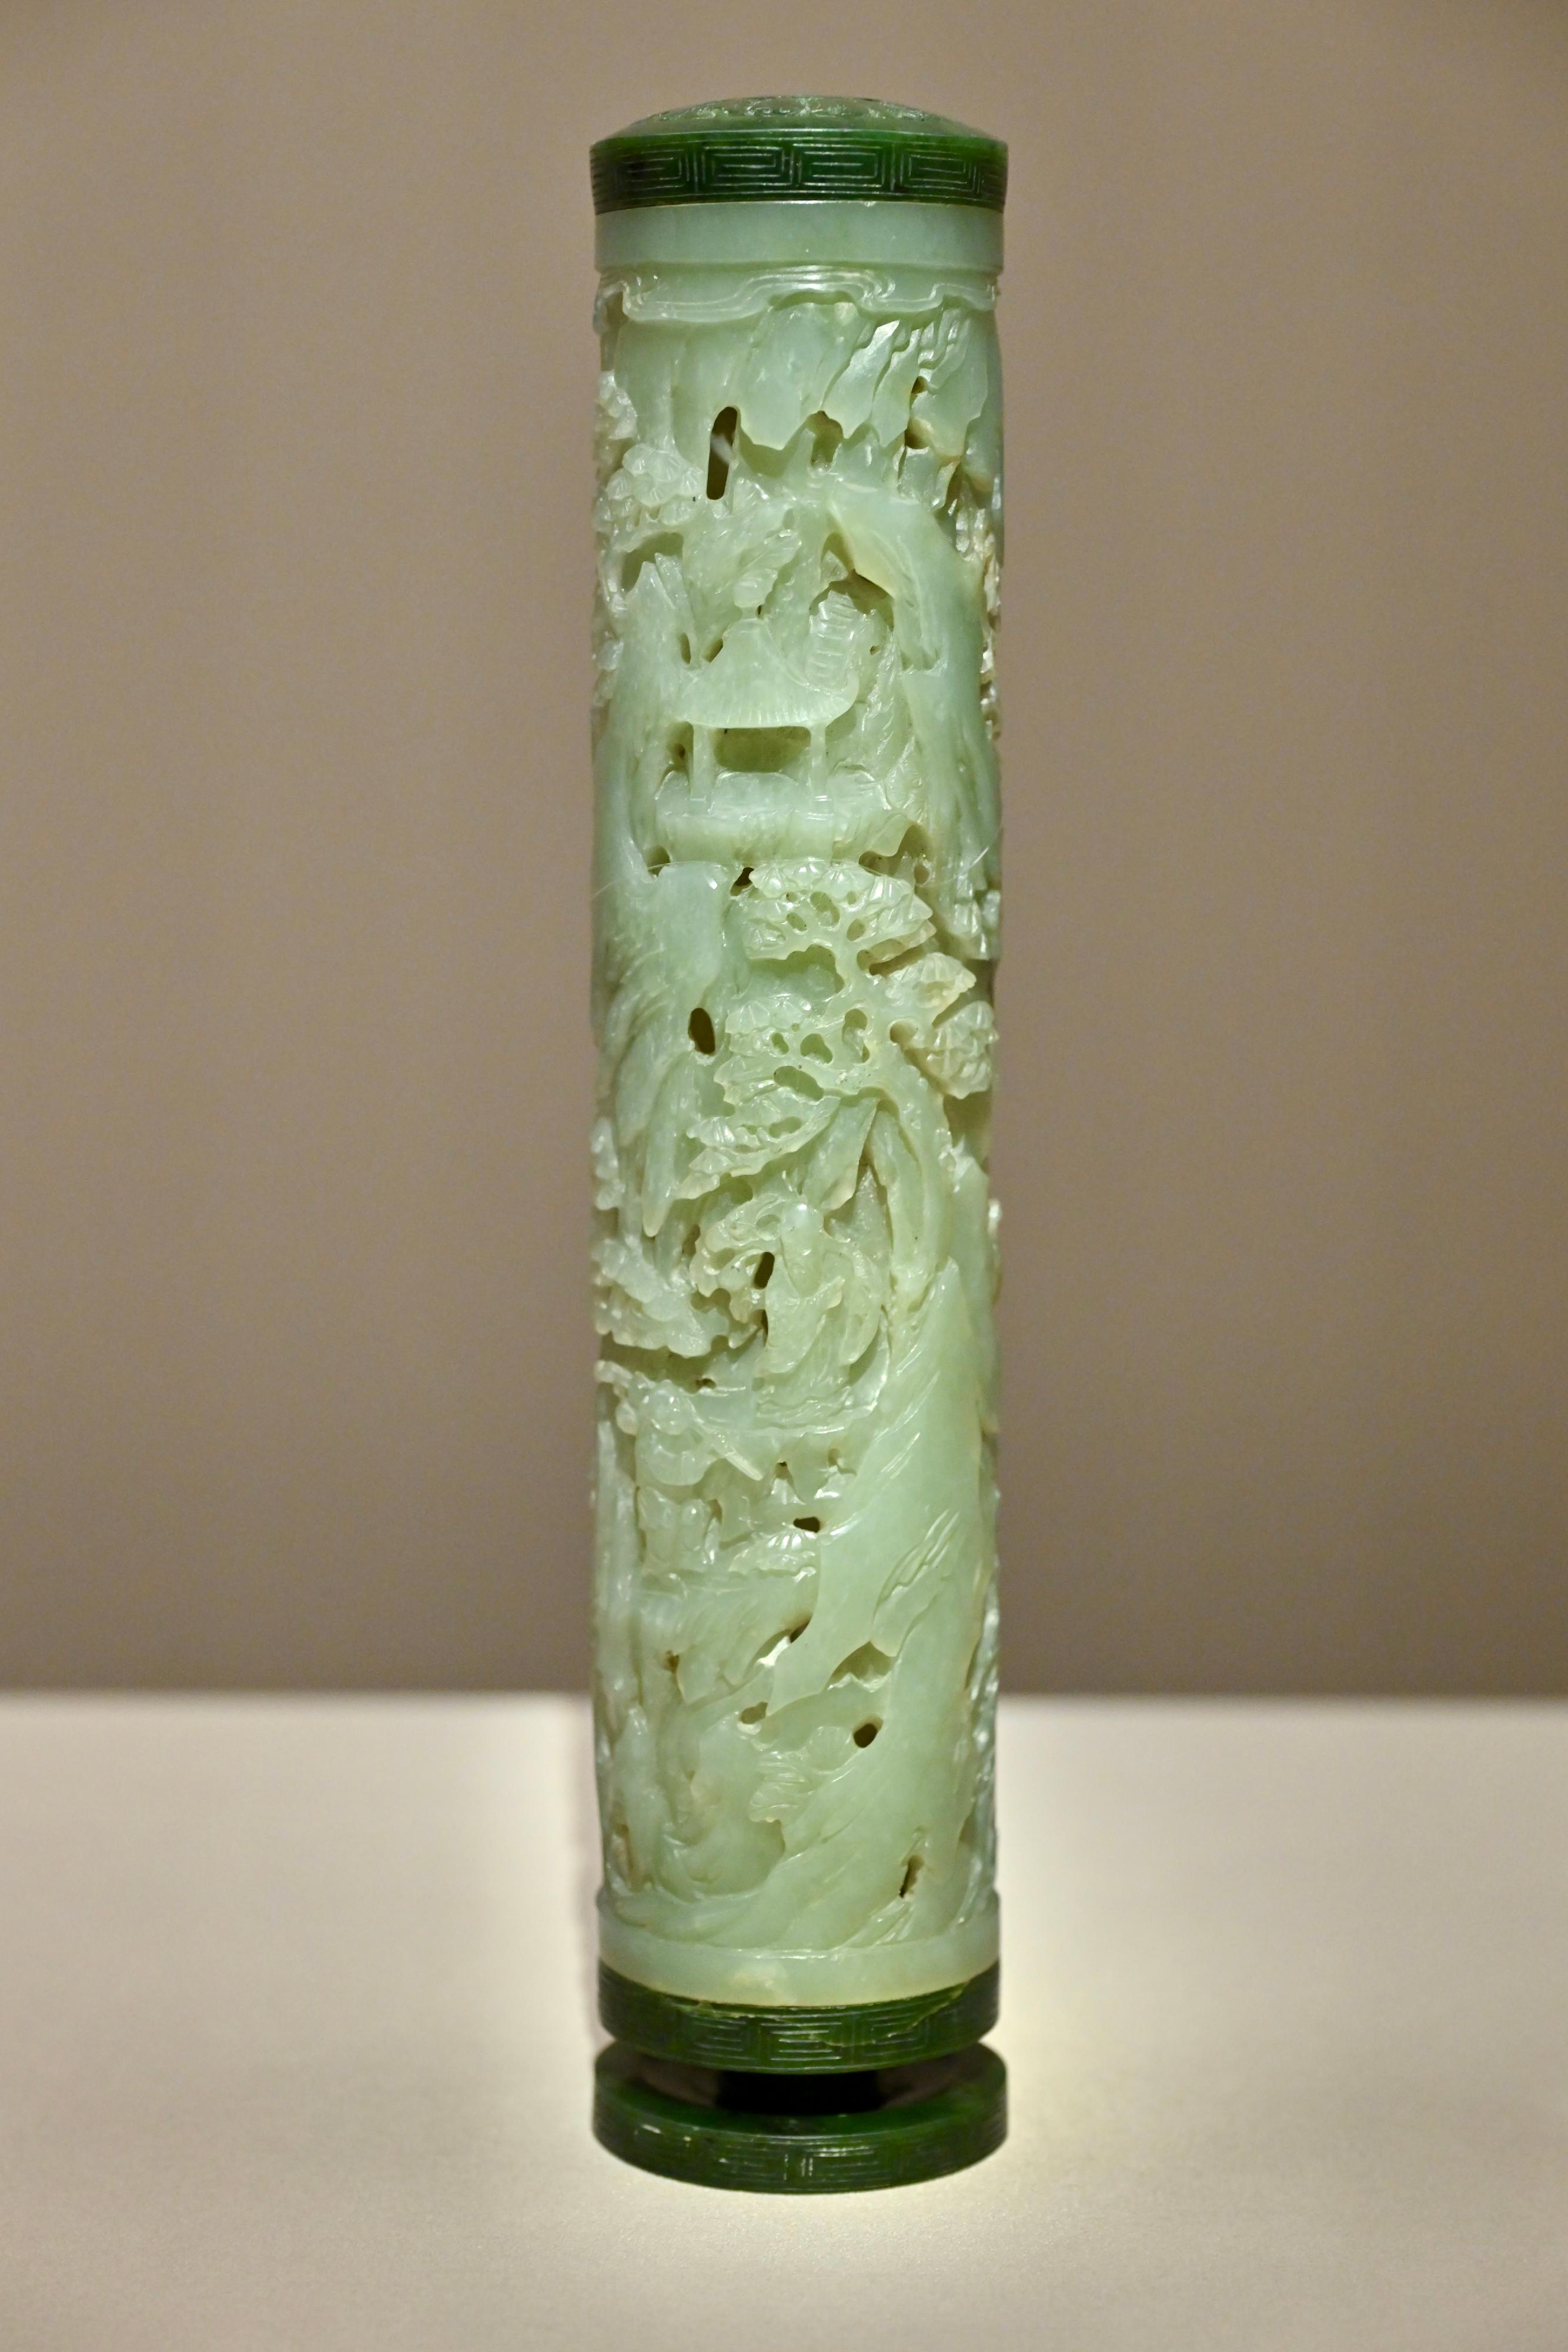 The opening ceremony of the "The Hong Kong Jockey Club Series: Fragrance of Time - In Search of Chinese Art of Scent" exhibition was held today (June 27) at the Hong Kong Museum of Art. Picture shows an incense holder carved with a landscape and figure design from the Qing dynasty of the Shanghai Museum collection.
